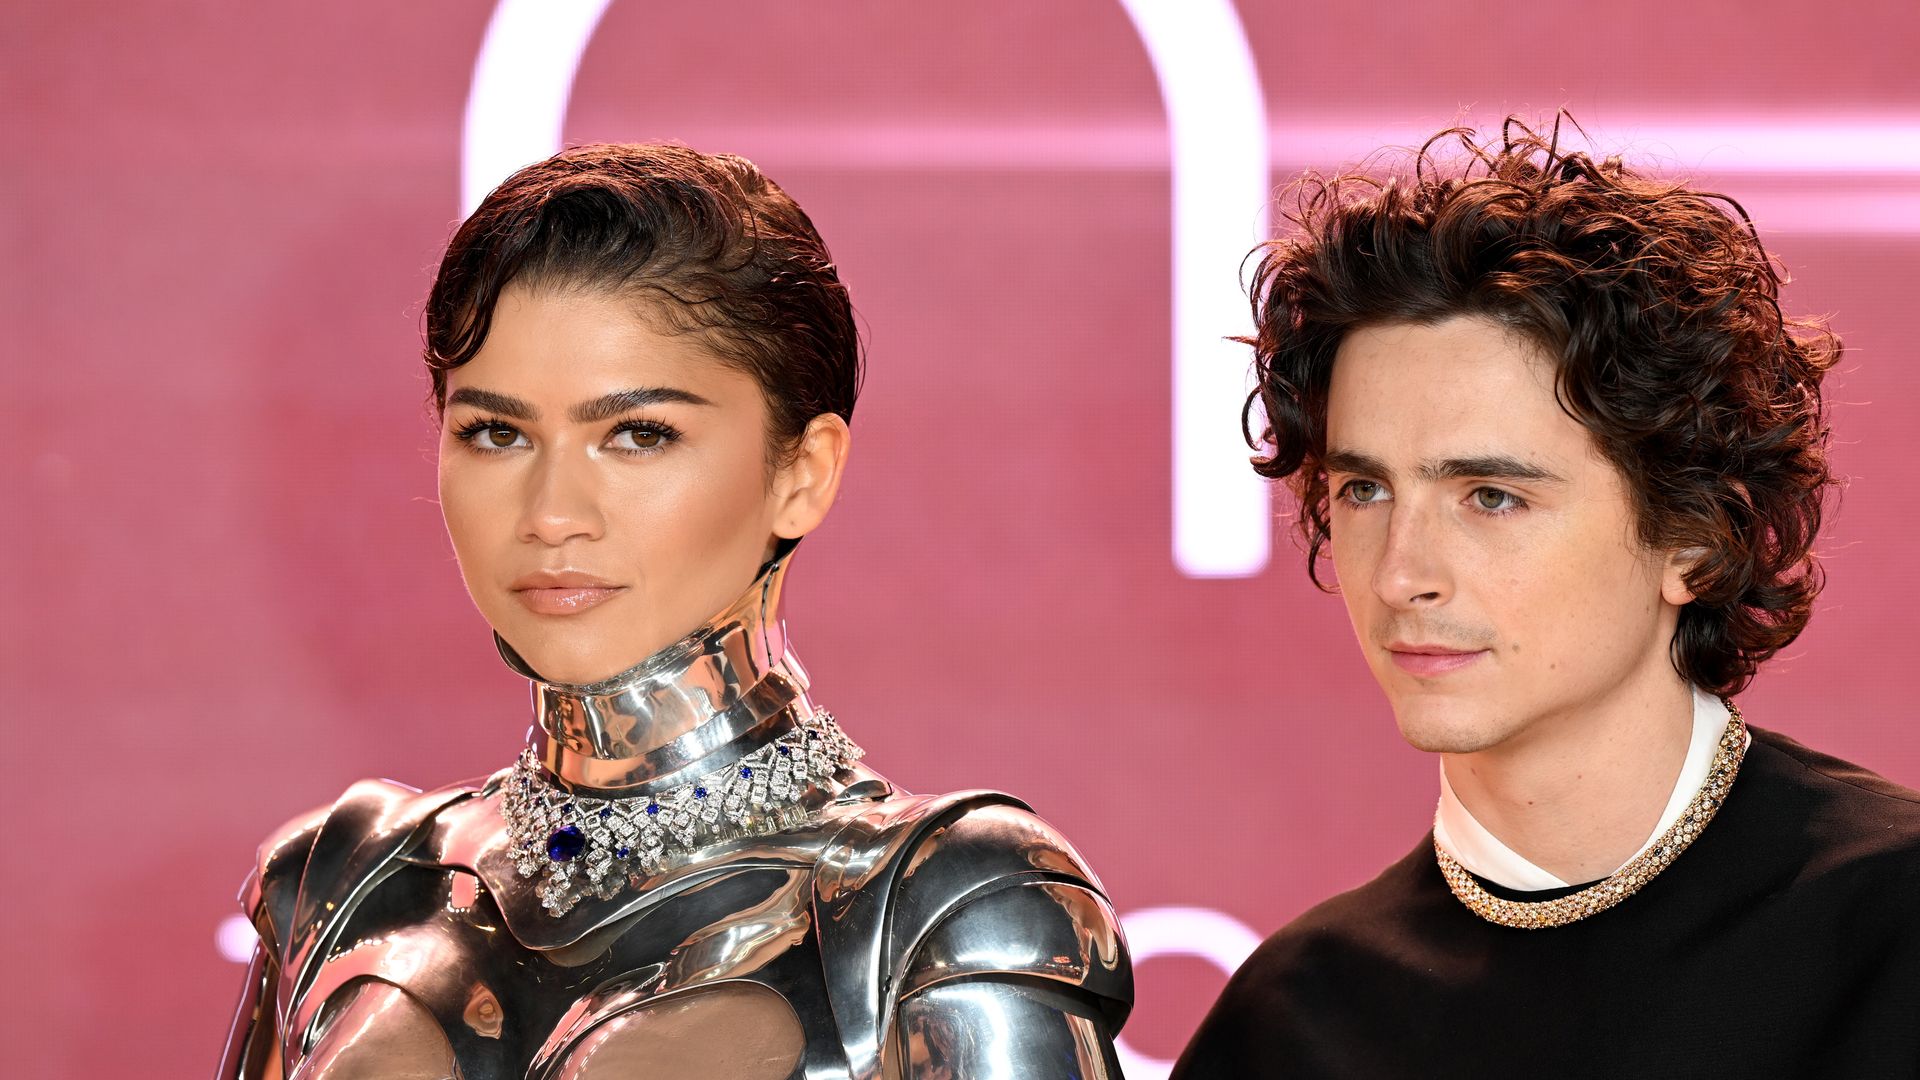 timothée chalamet and the cast of “dune: part two” at the premiere in , Zendaya